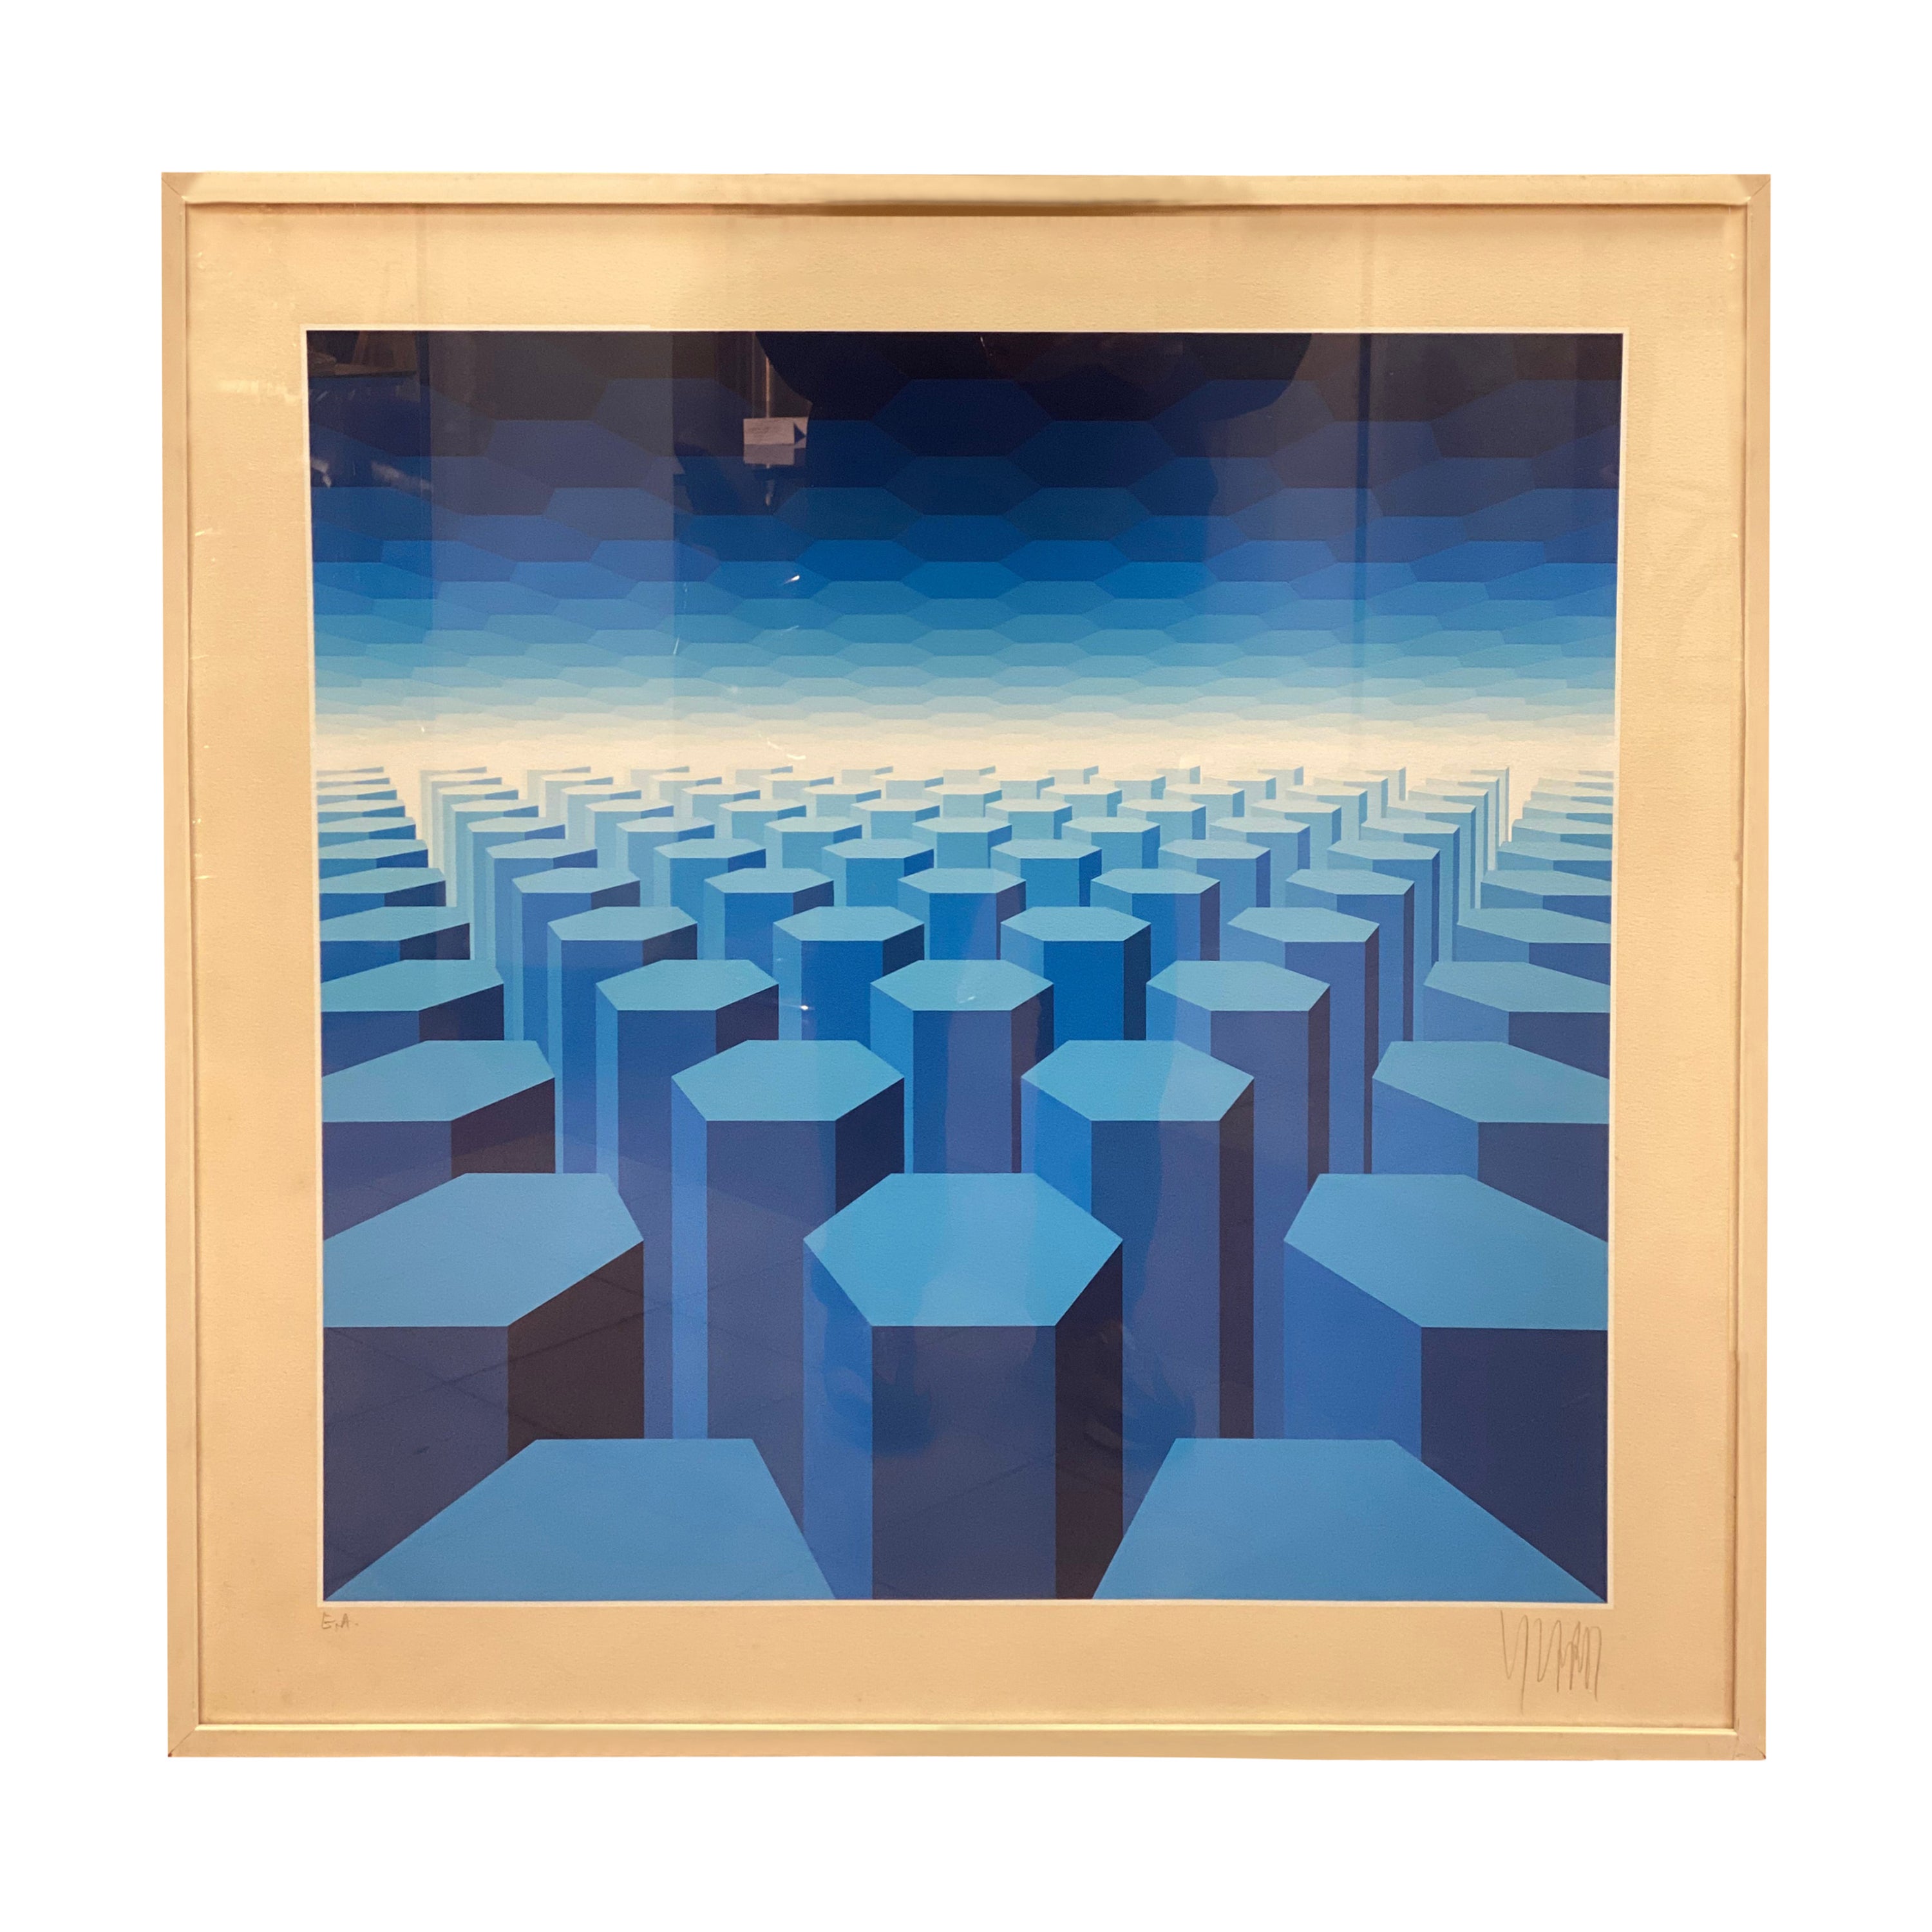 Yvaral (Jean Pierre Vasarely) “So Shades of Blue” - Circa 1970 For Sale